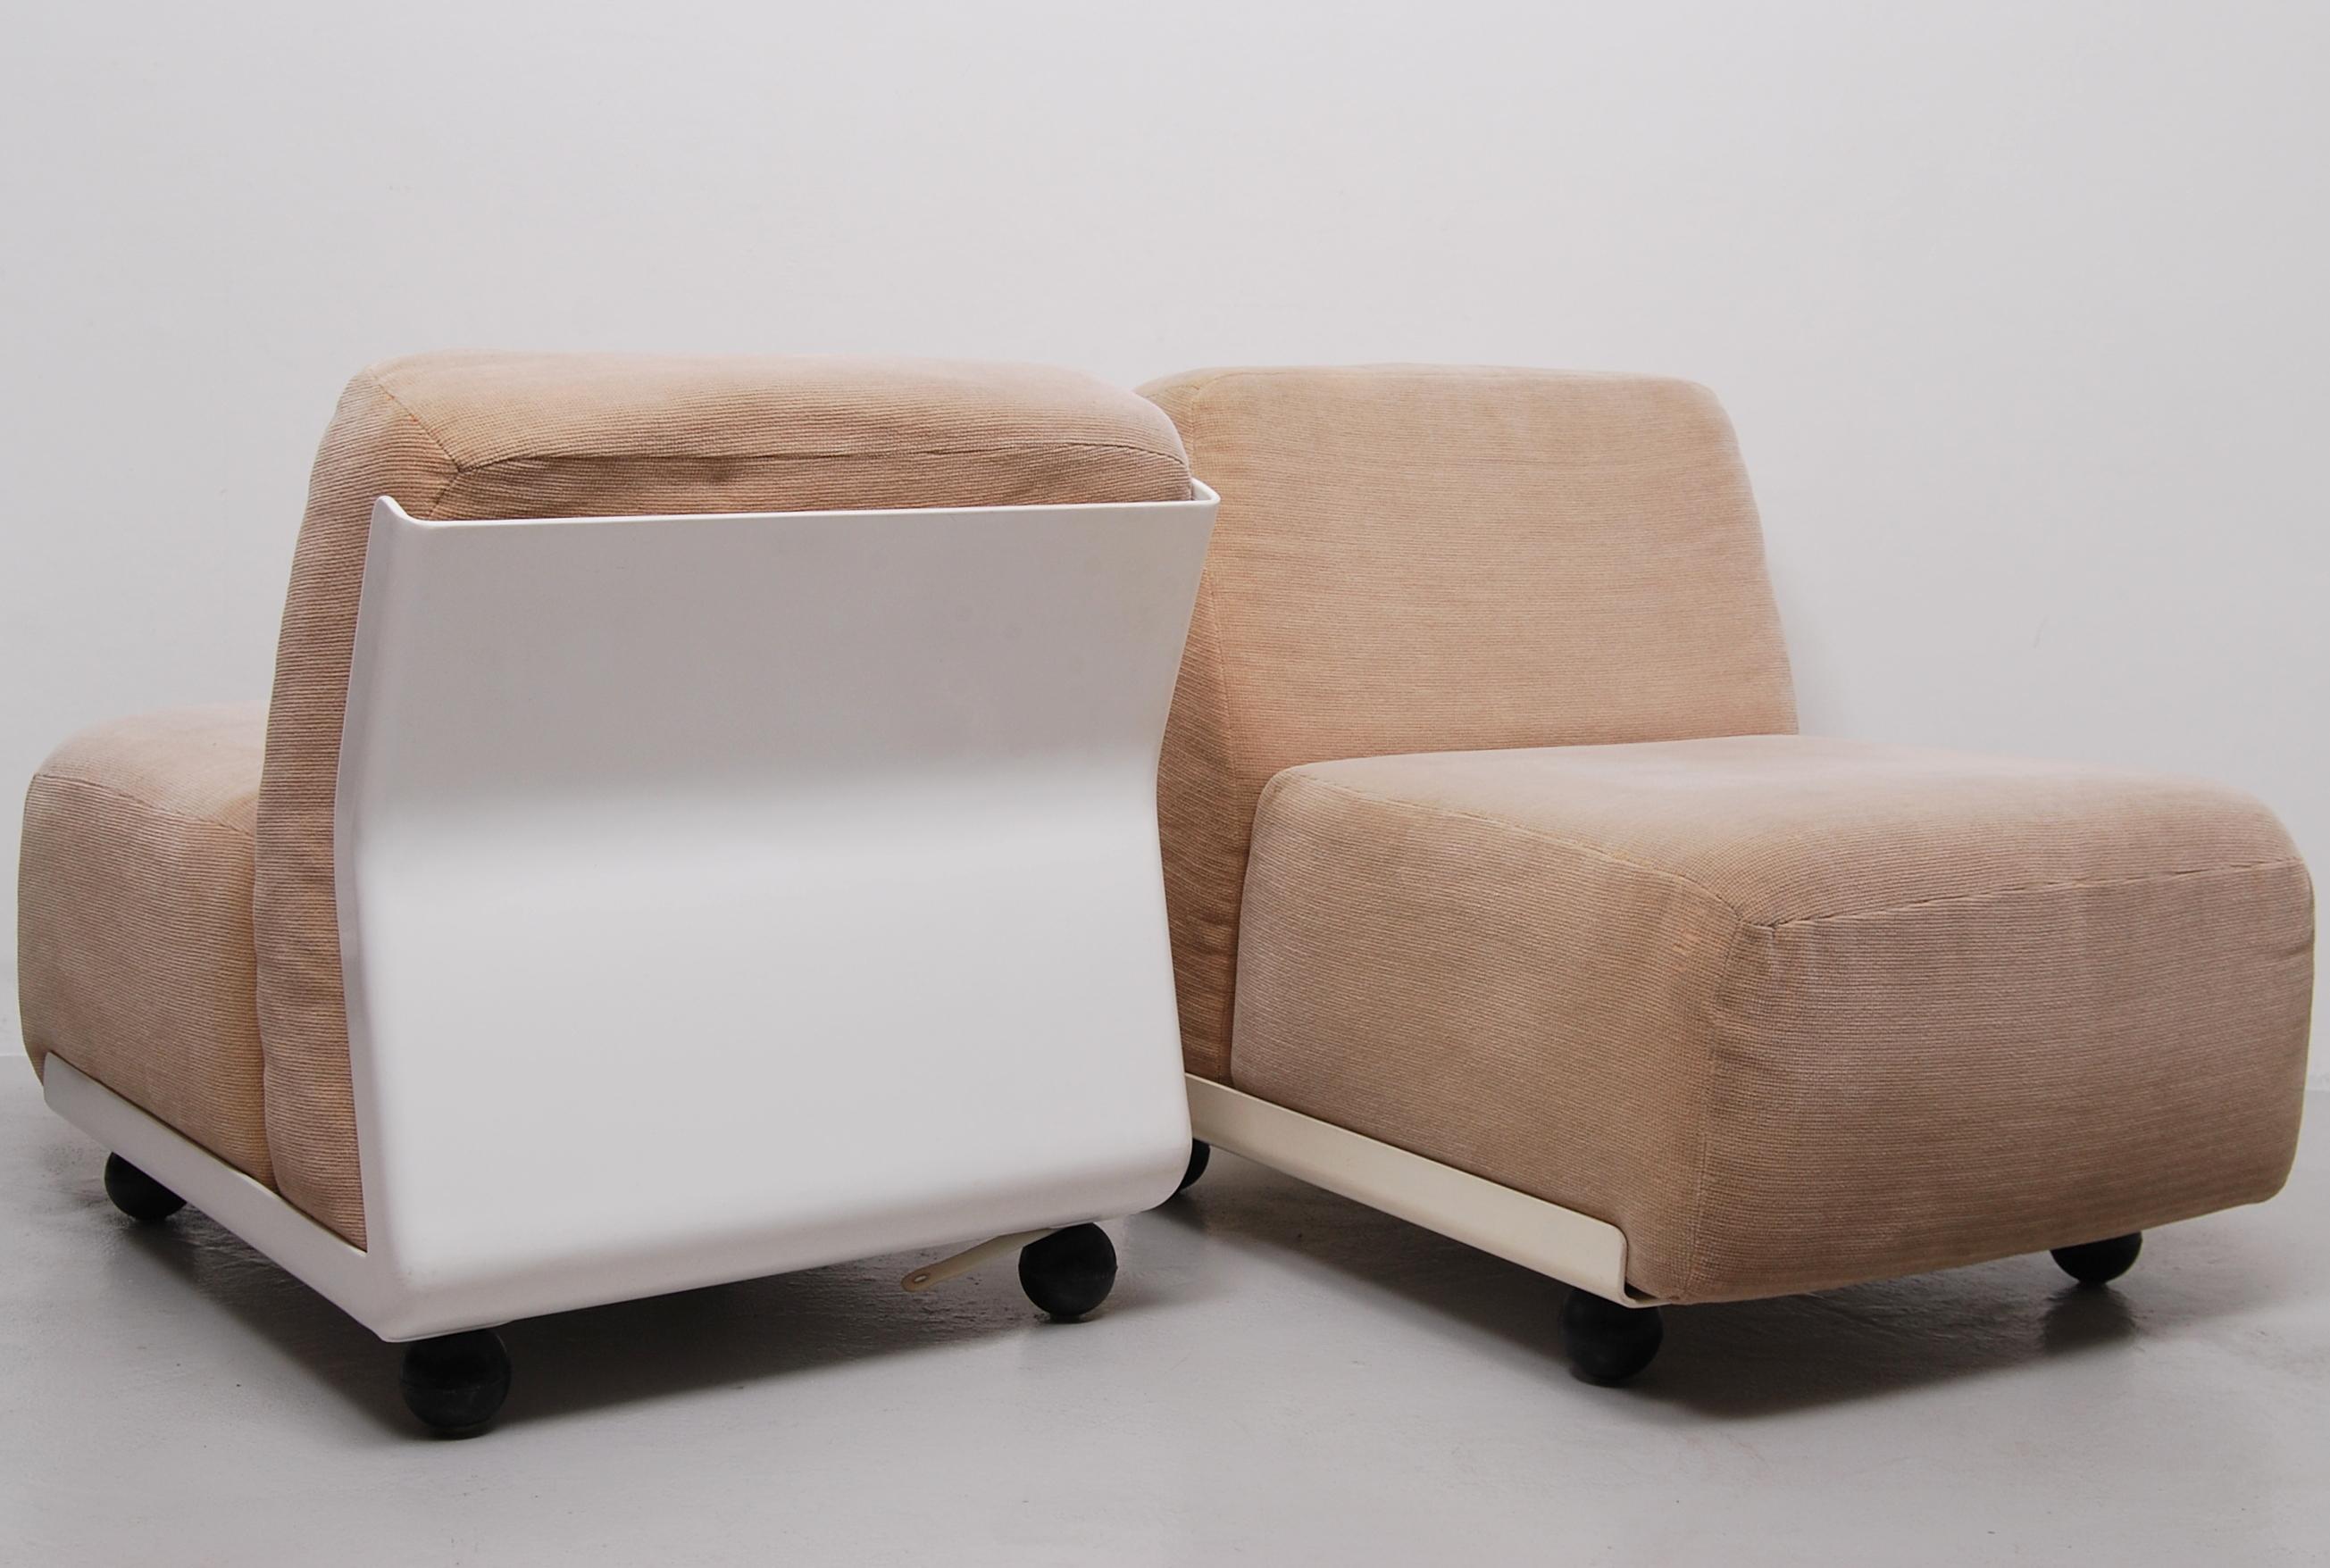 Two amanta model 24 chairs designed by Mario Bellini for B&B Italia. They were manufactured in the early 1970s, these differ from the standard Amanta chair by being narrower and lacking the thin vertical notch in the middle of the back. The Amanta